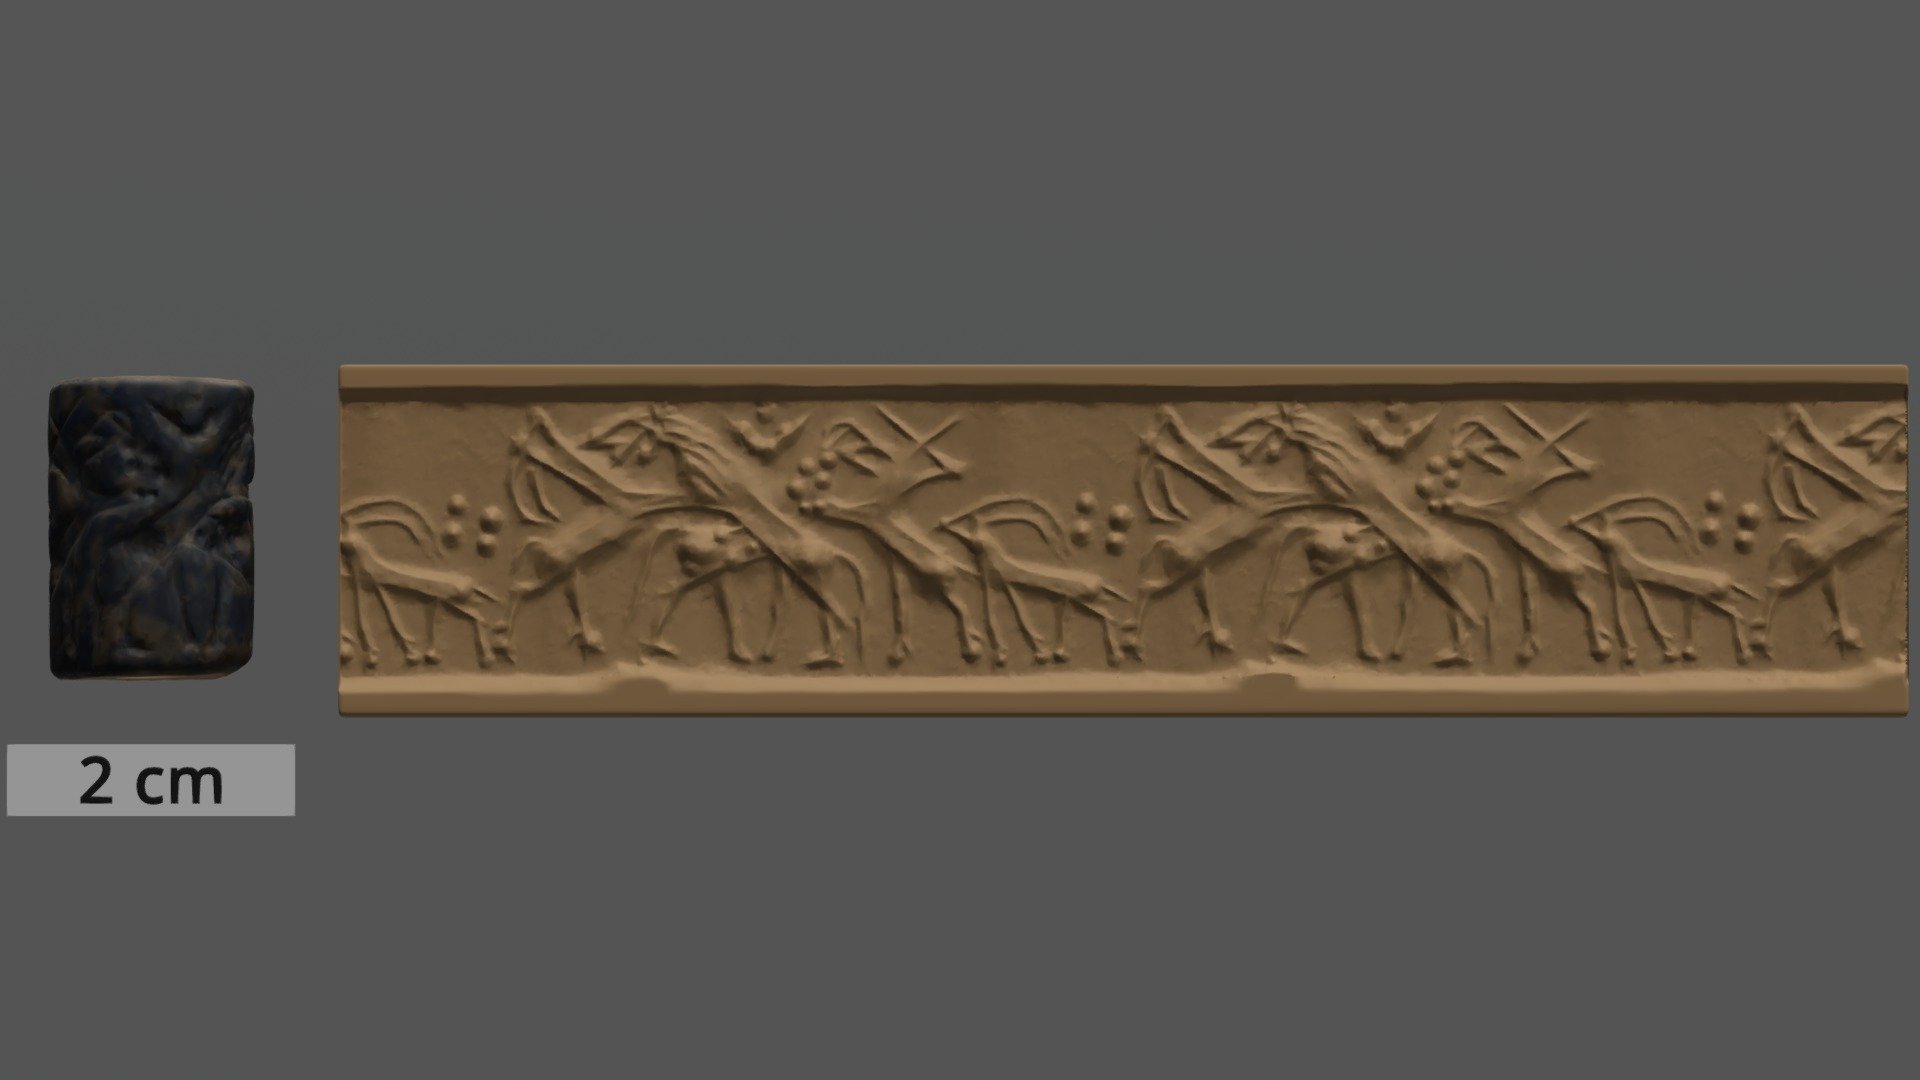 Photogrammetric model with virtual impression of carved surface

Catalog Number: 156696.nosub[1]

Description: seal

Notes: Four rampant animals, two crossed lions attacking two antelopes; at right an antelope with all feet on the ground, above four globes close together; between the lions and above a crescent and a globe.

Materials: stone; lazurite - lapis lazuli

Time Period: Early Dynastic

Accession Number: [1497] Excavations at Kish, Iraq (Expedition)

Accession Year: 1924

Other Numbers: 2312 A, 88264, 88484

City/Town: Kish

Collector/Source: Excavations at Kish, Iraq, Excavations at Kish, Iraq



https://collections-anthropology.fieldmuseum.org/catalogue/1366113



Photography: JP Brown 

Image generation: Sam

Metashape Pro: Sam

Meshlab 2016.12: Sam

ZBrush: JP Brown
 - 156696 cylinder seal - Download Free 3D model by fieldmuseumeducation 3d model